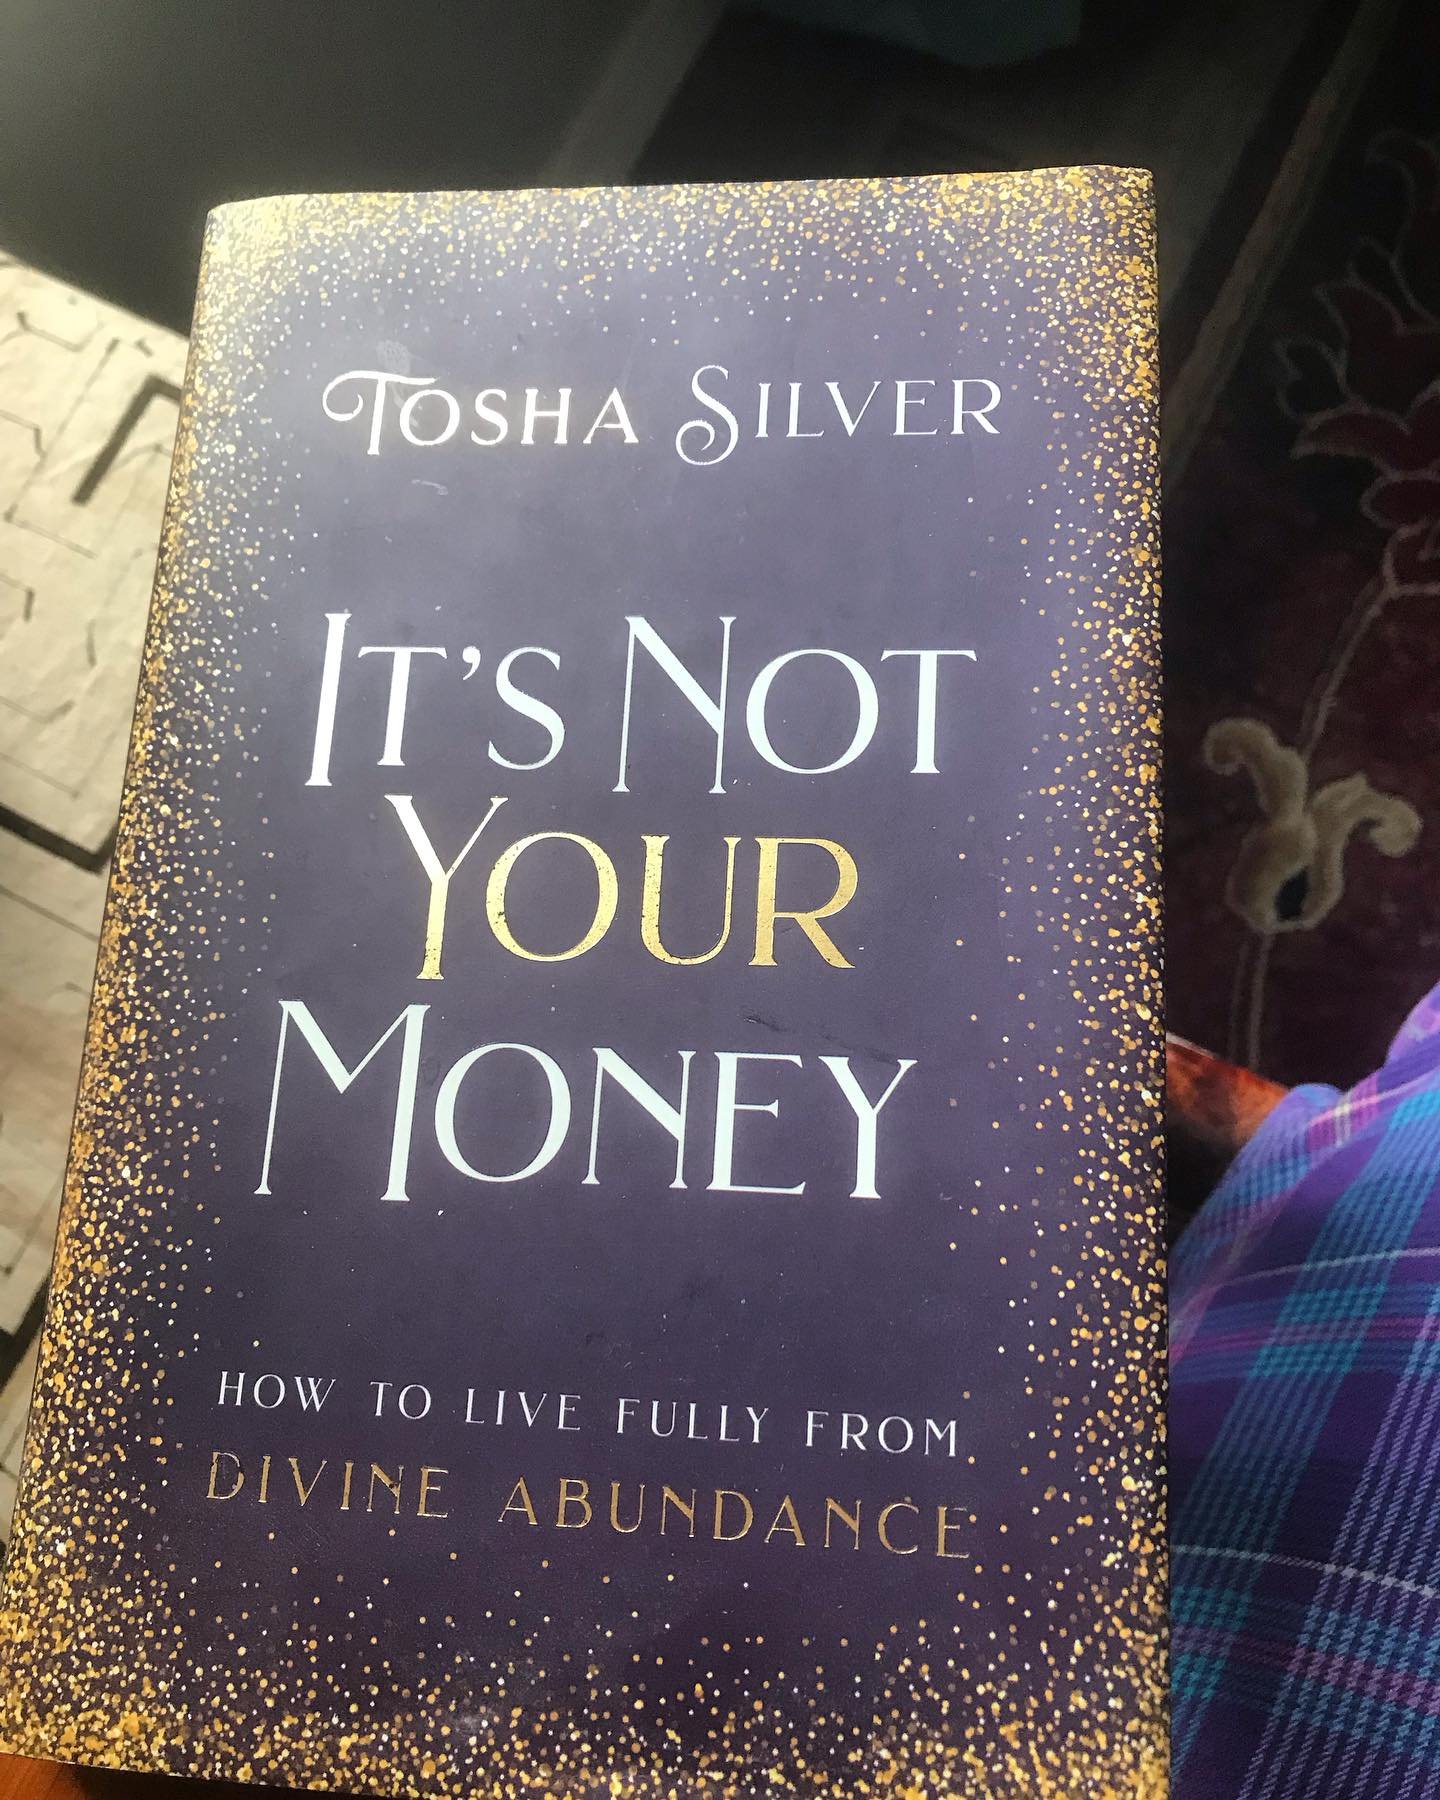 This book has been calling to me from the shelf 🙏💃💕🤩 #divineguidance #divinefeminine #divinemasculine #abundancemindset #shiftingrealities